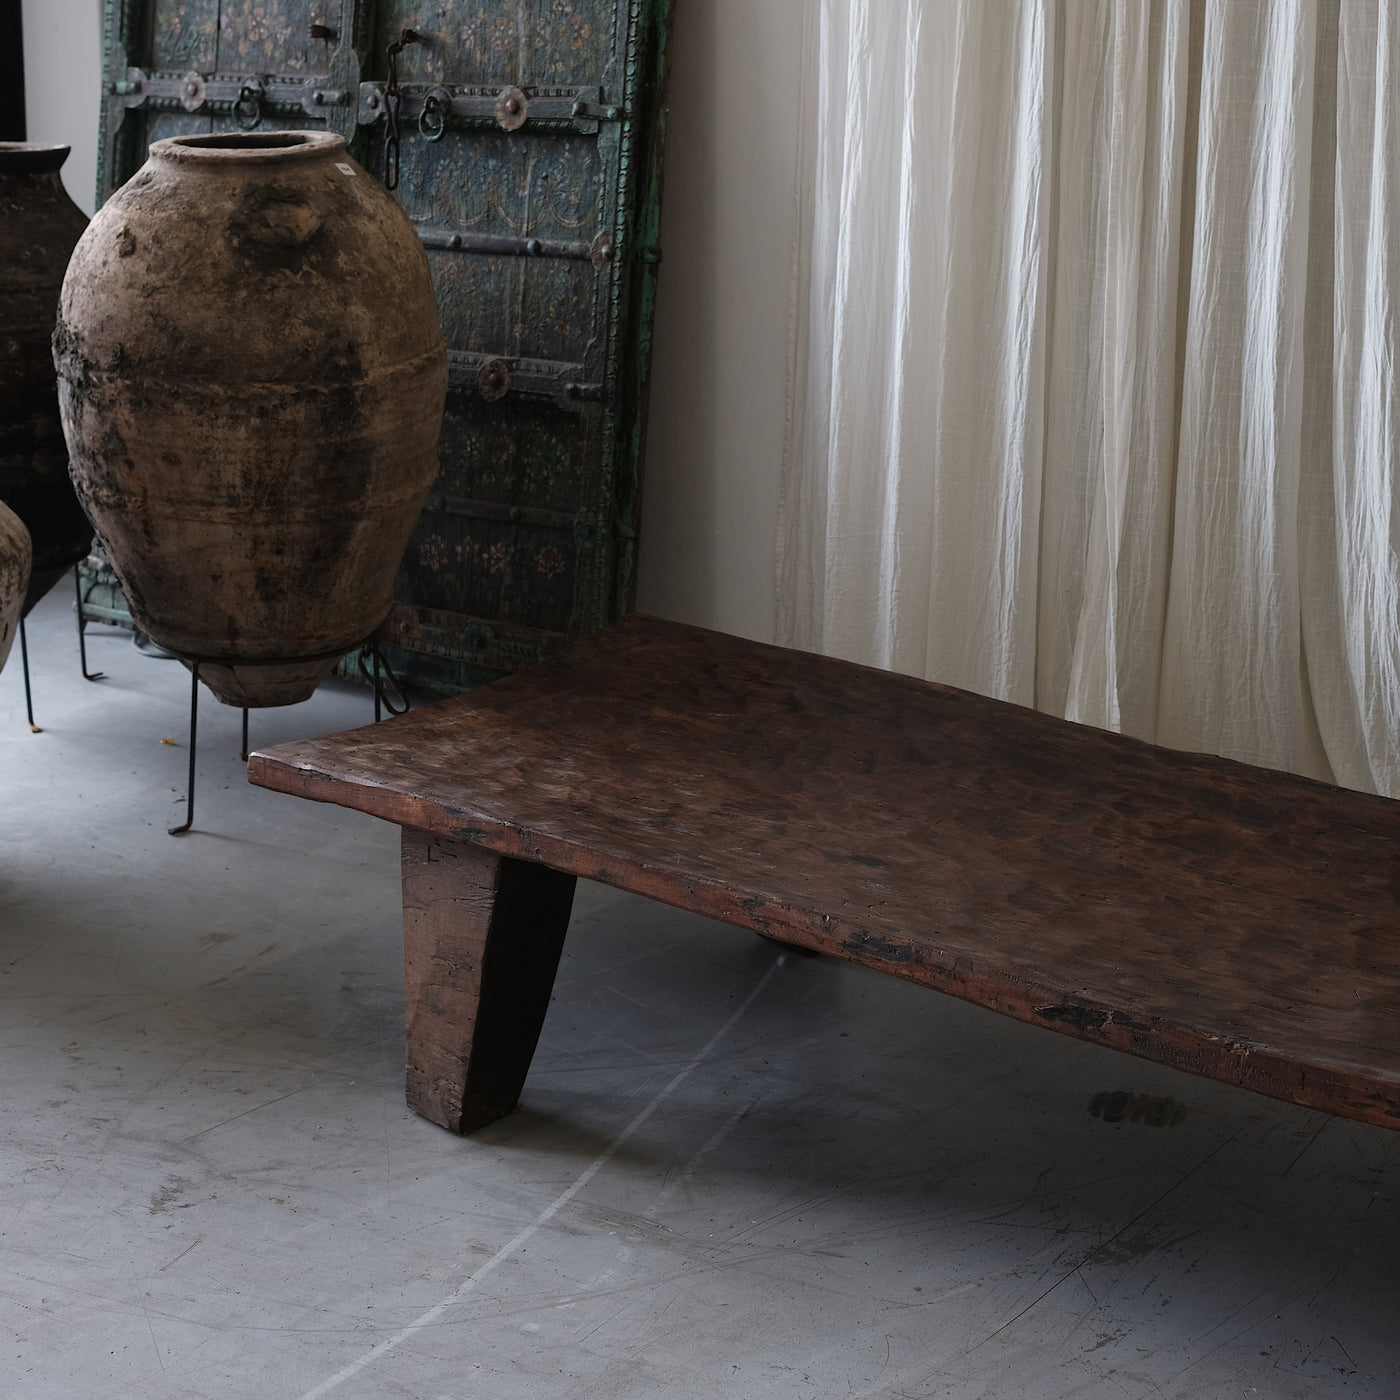 Authentic old naga table n ° 39